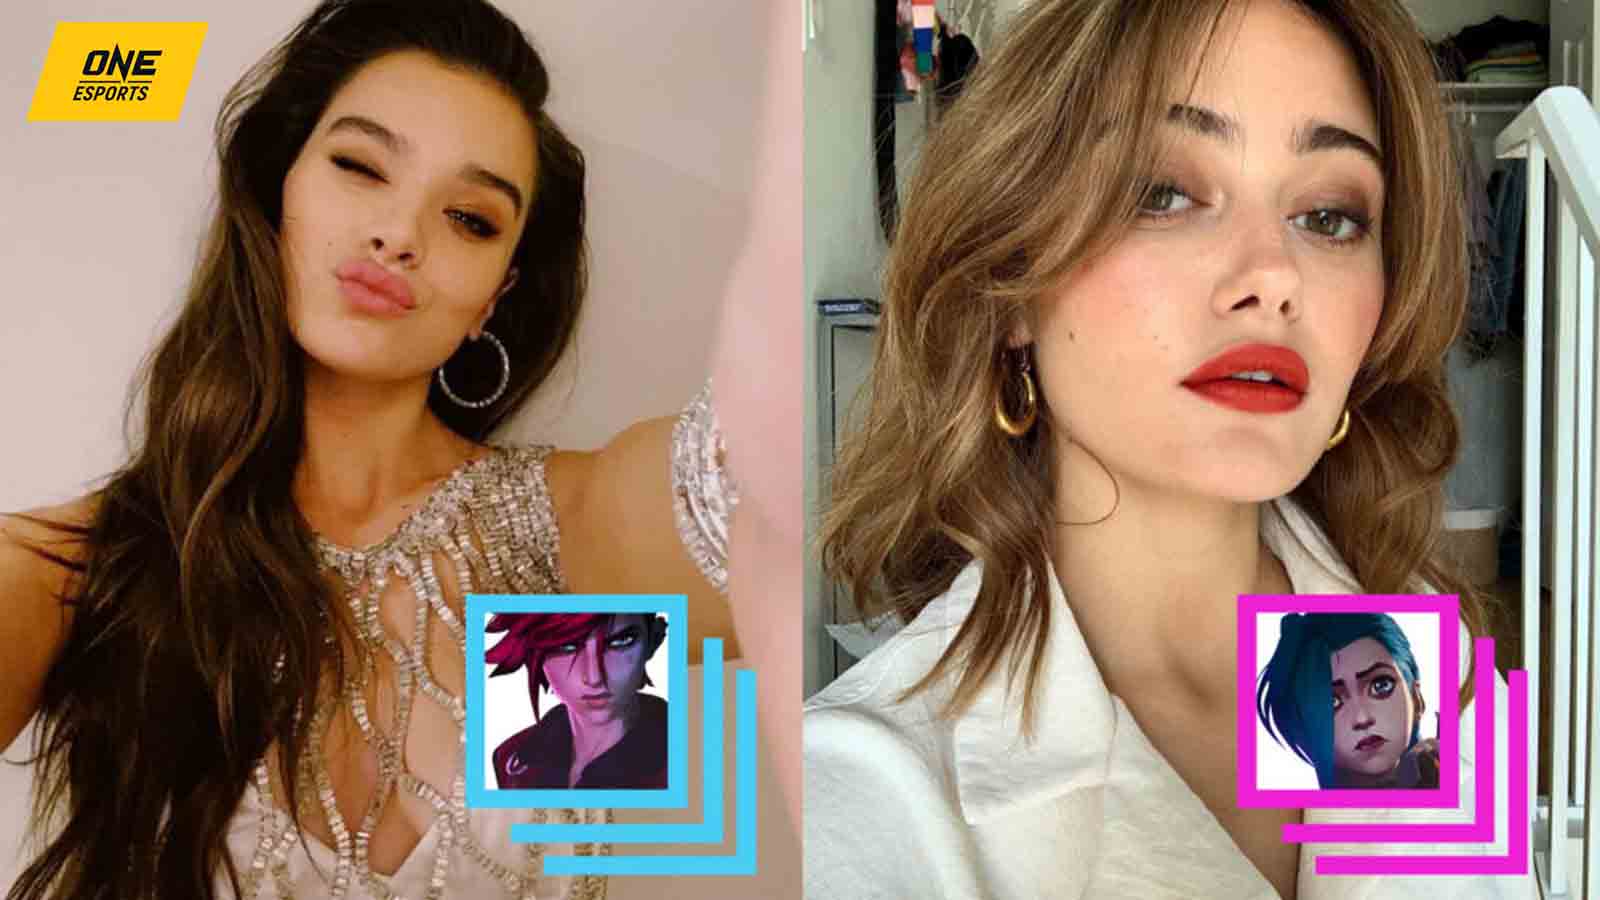 League of Legends Arcane voice actors Hailee Steinfeld and Ella Purnell